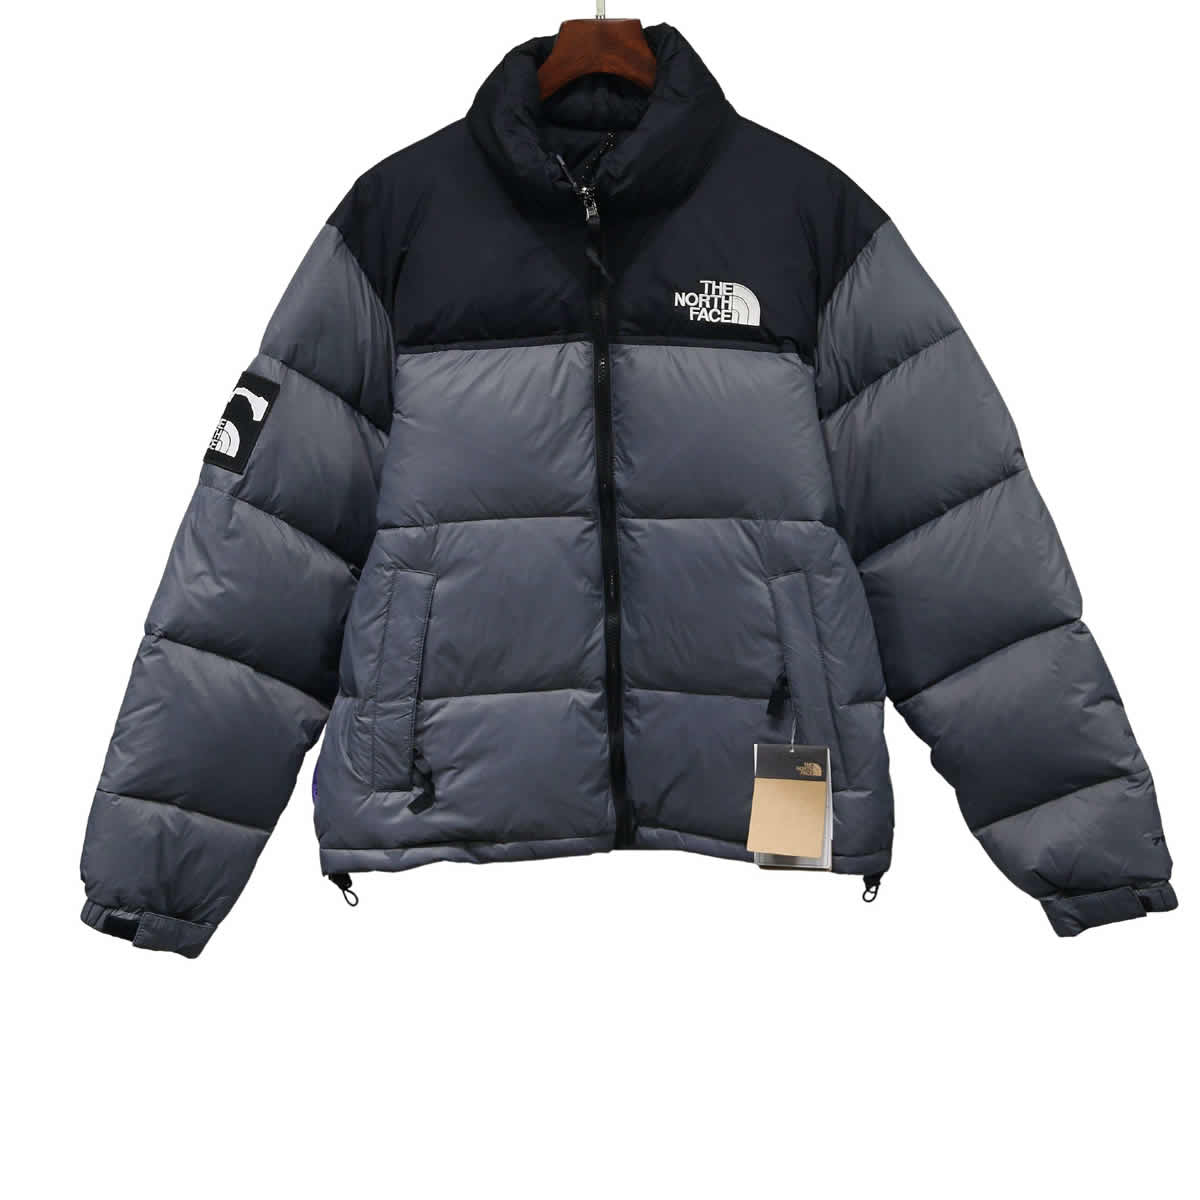 Invincible The North Face Down Jacket 1 - www.kickbulk.org